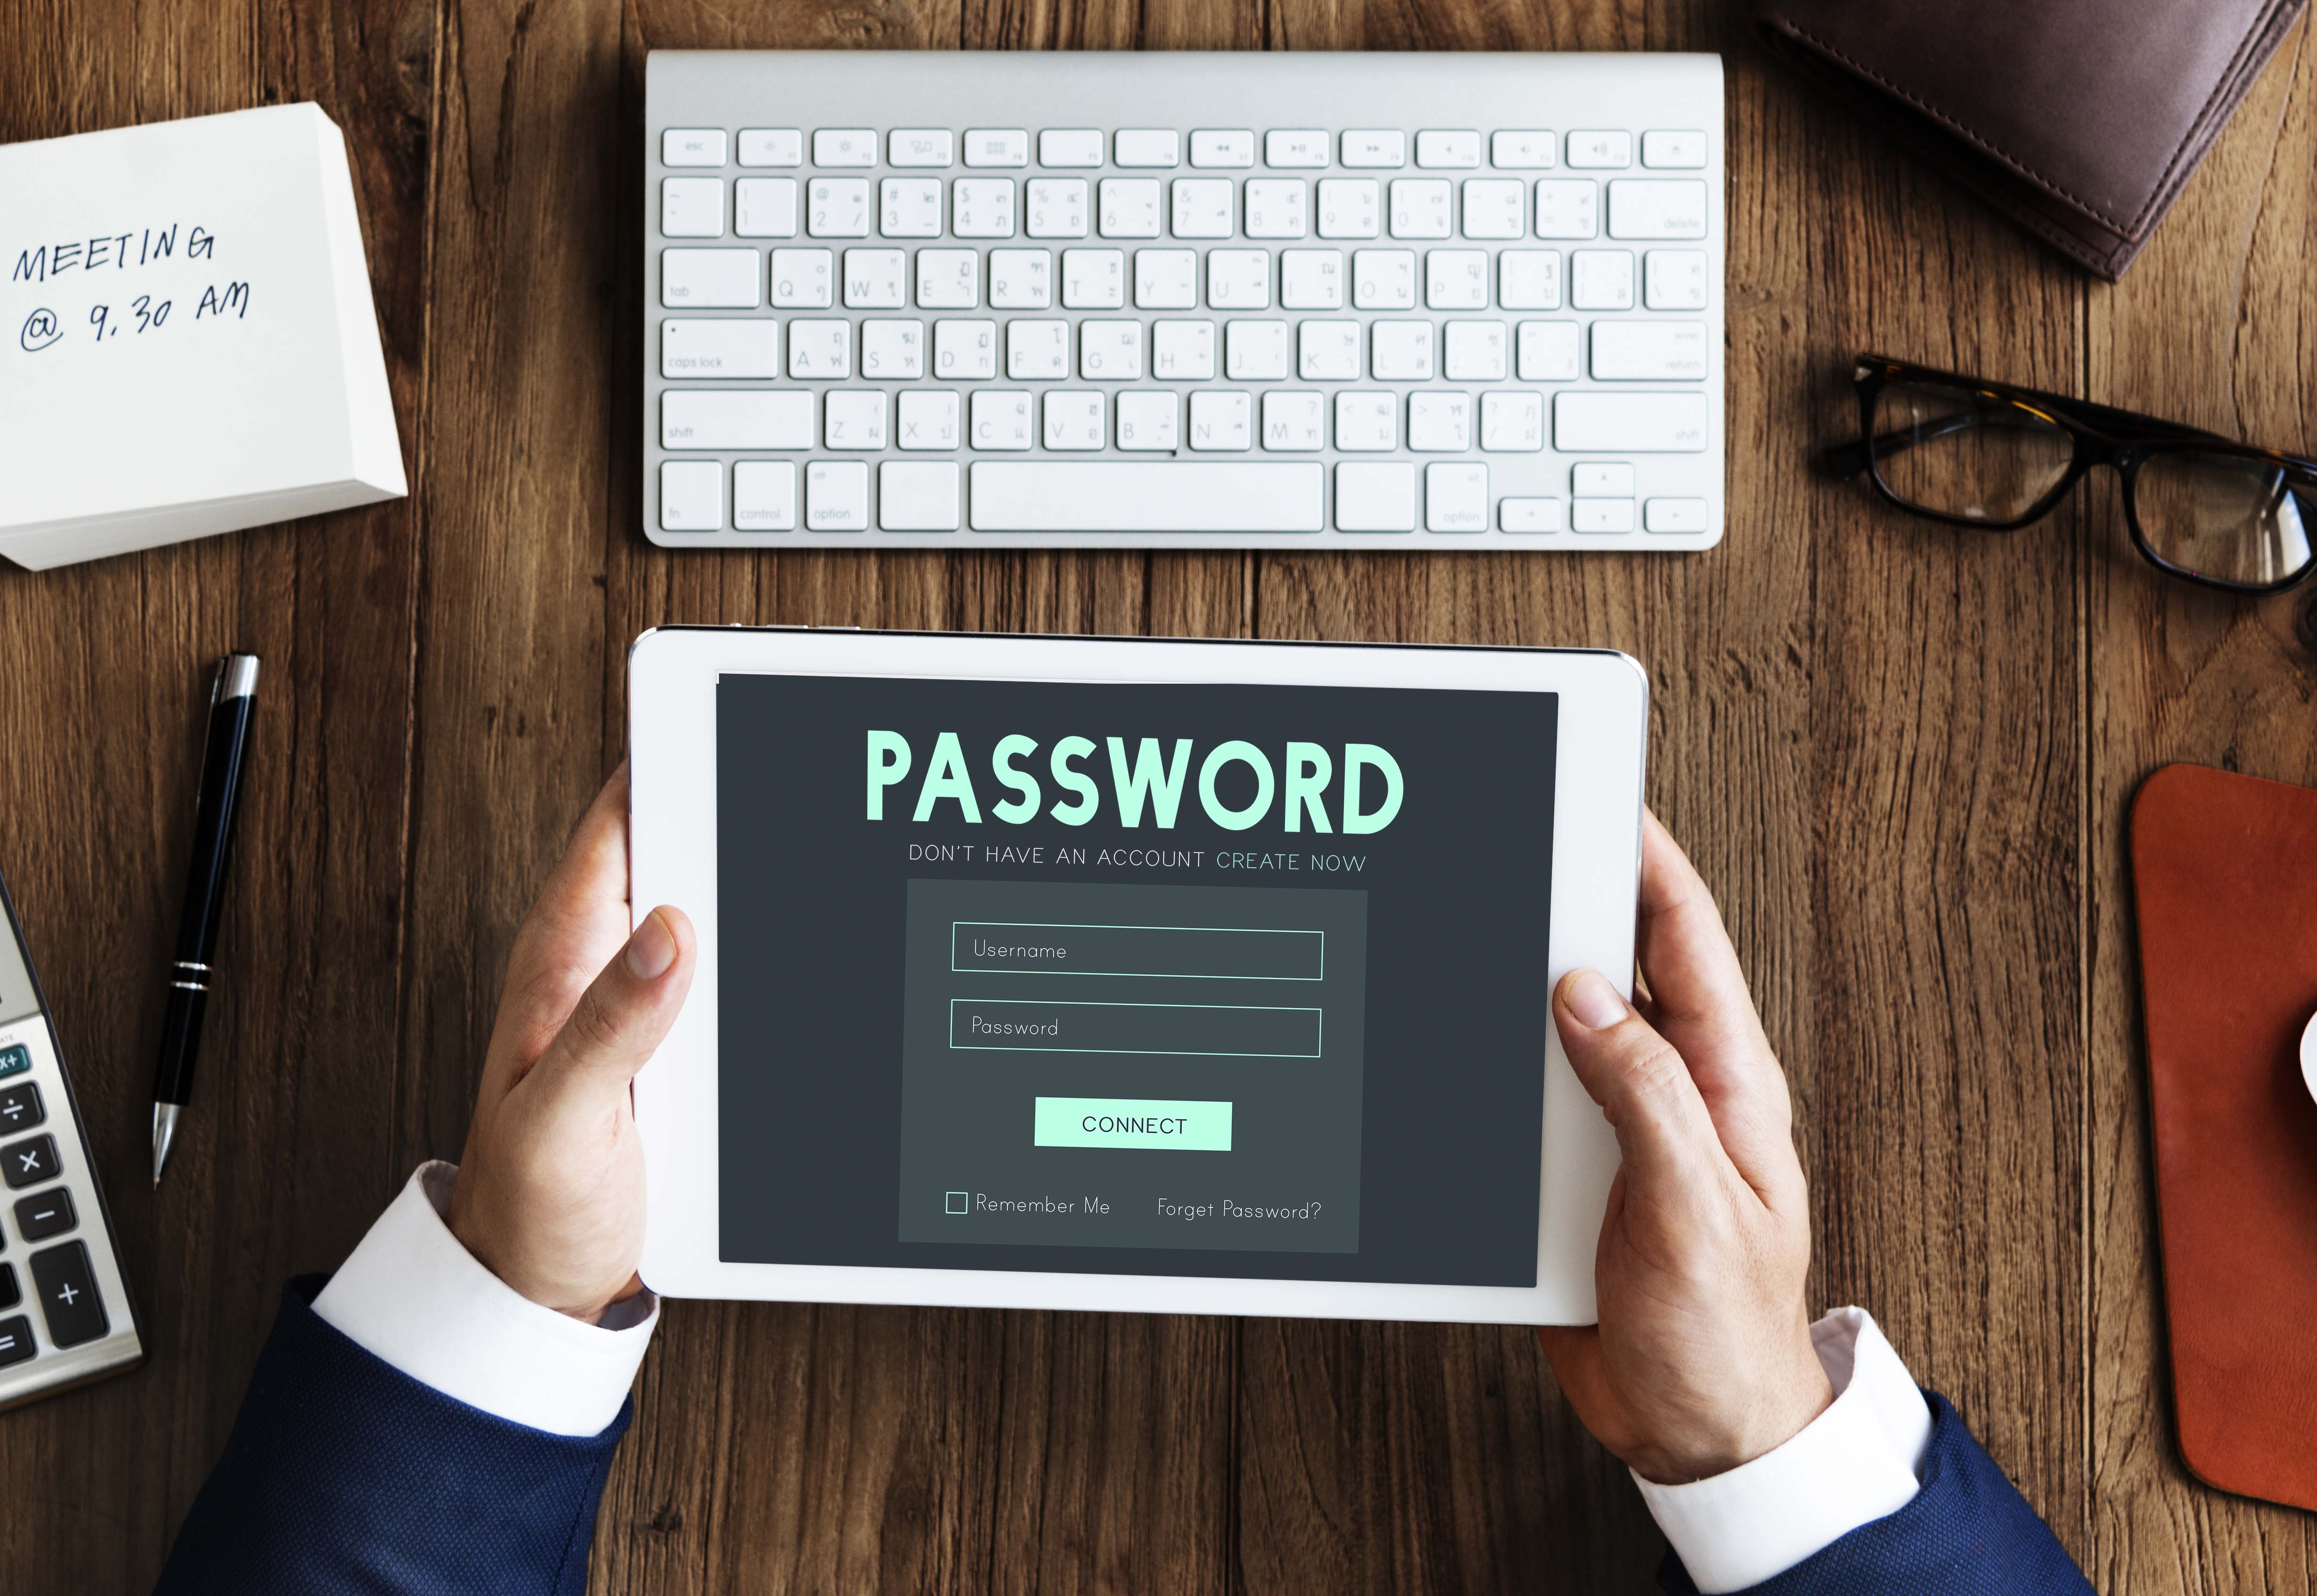 Are passwords becoming a weak spot at companies?